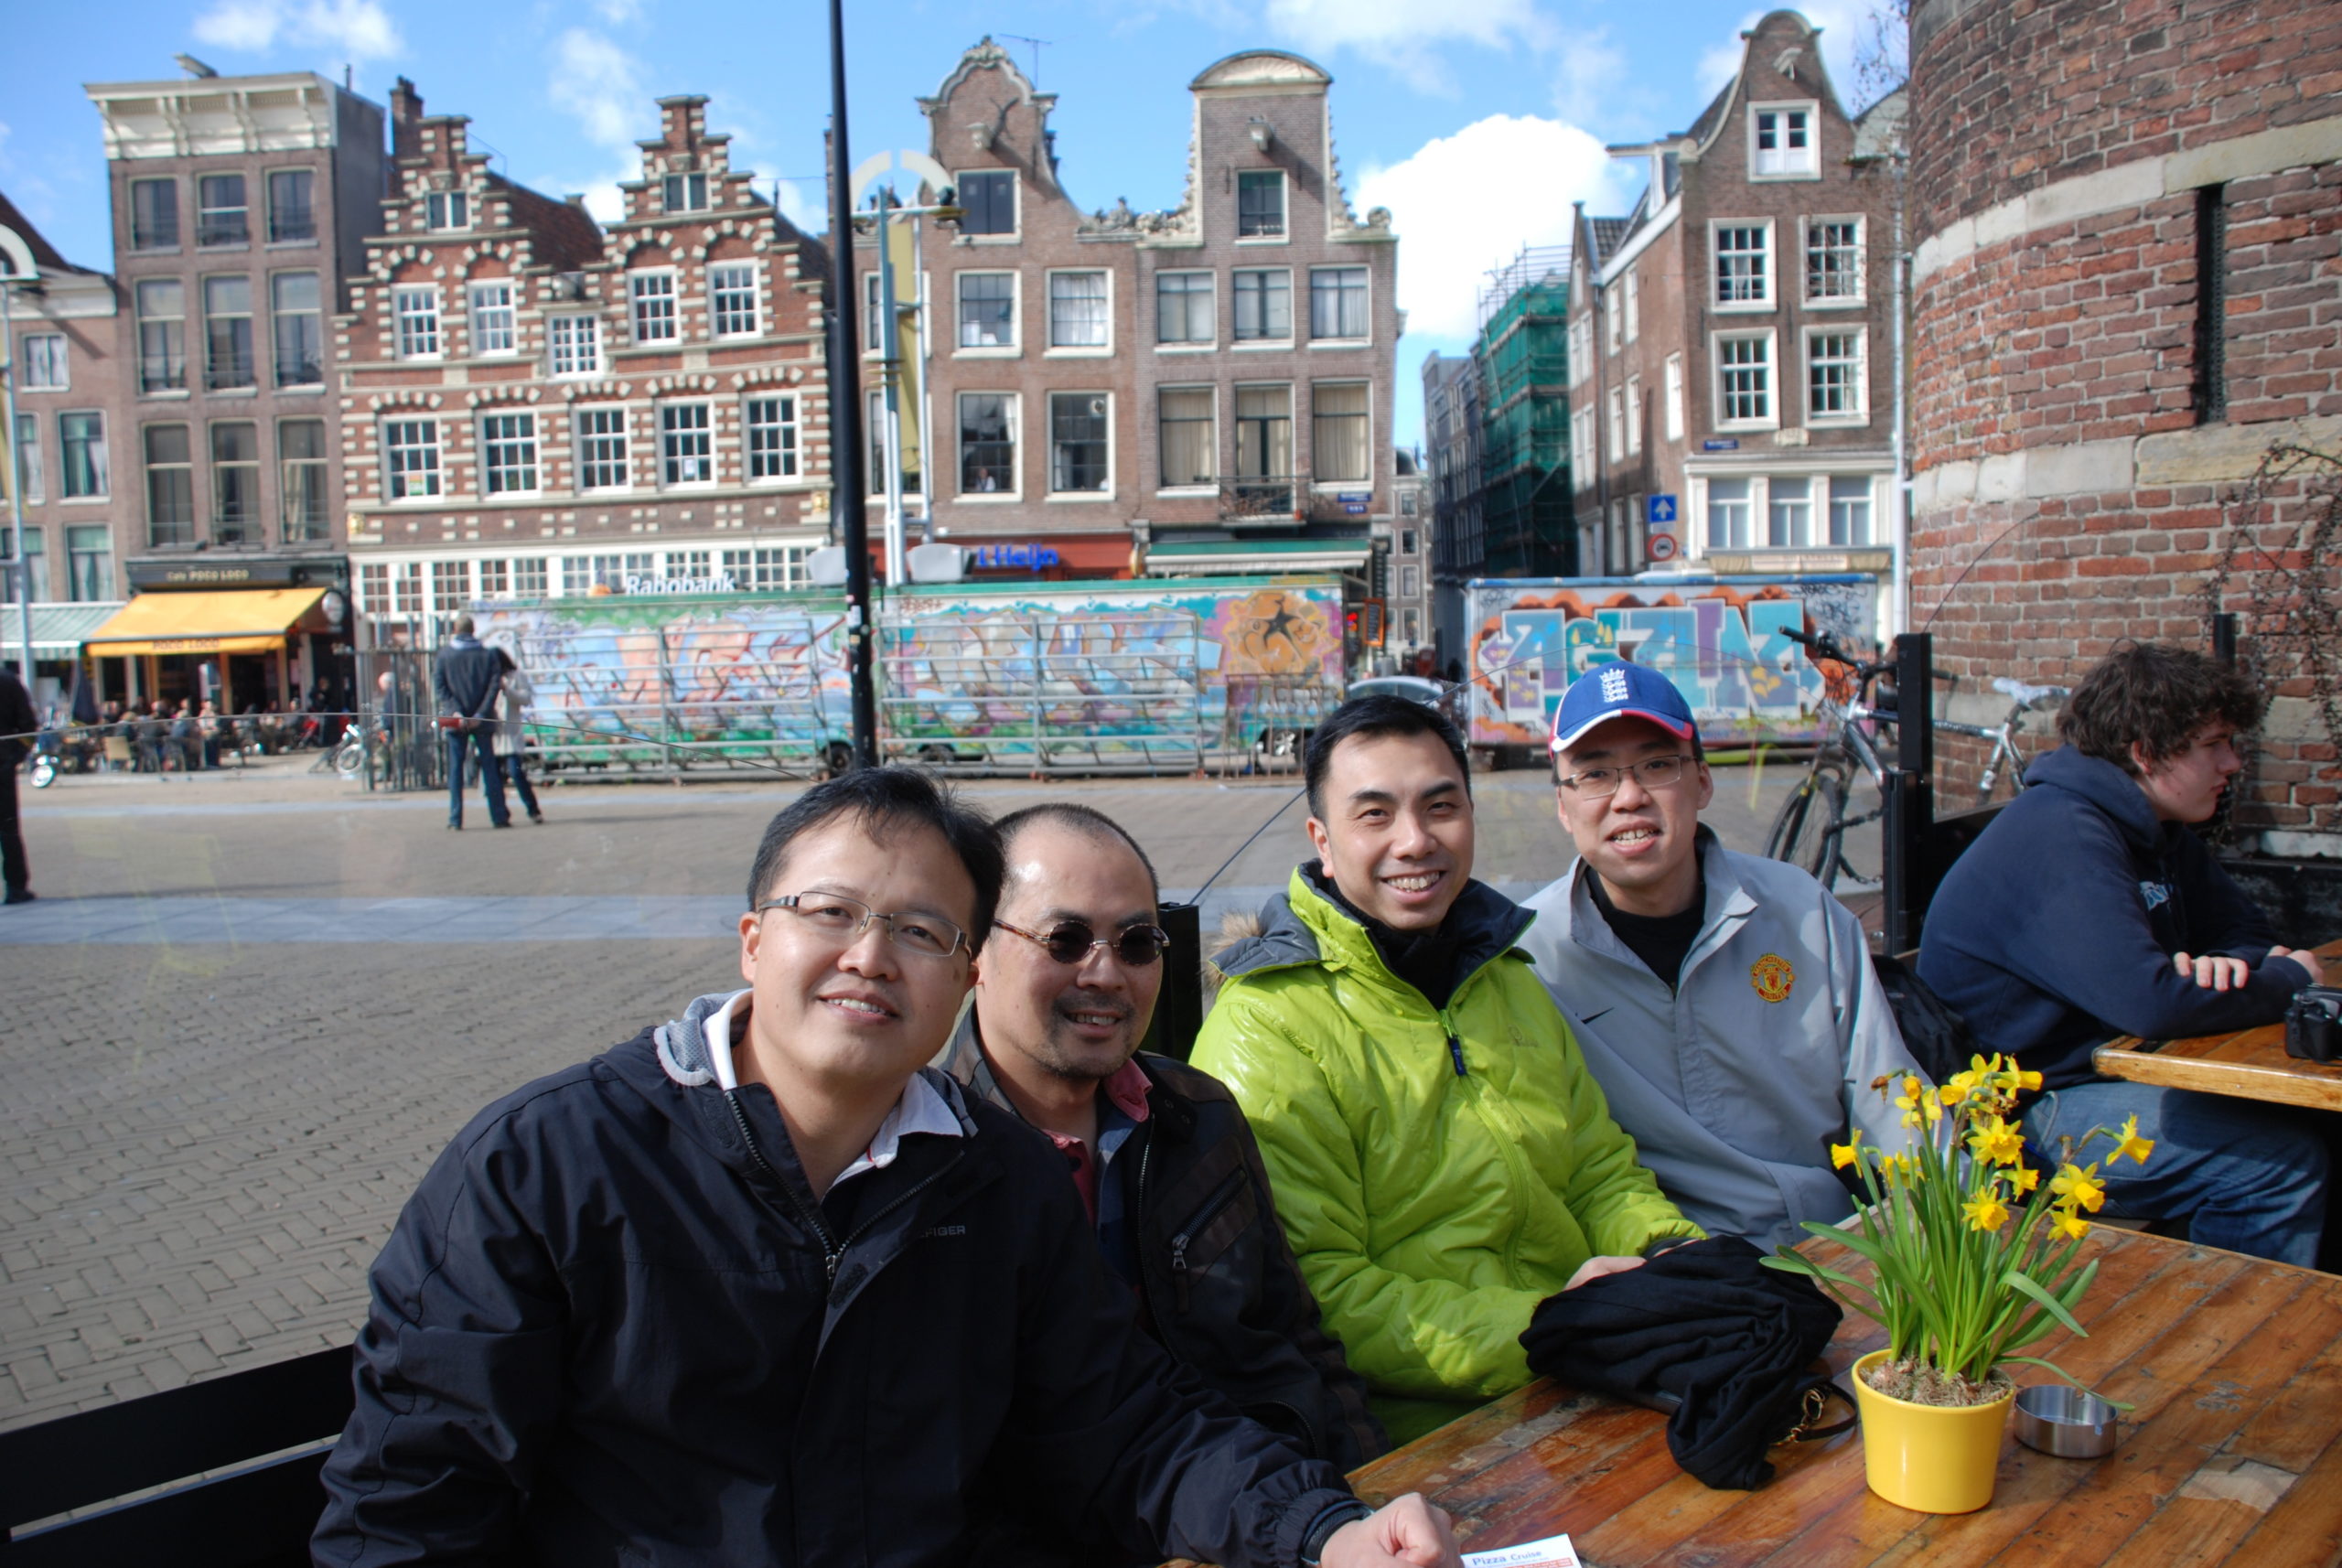 During his studies at CUHK Business School, Daren visited Mexico and the Netherlands. In addition to experiencing different cultures, he learnt about various business models.